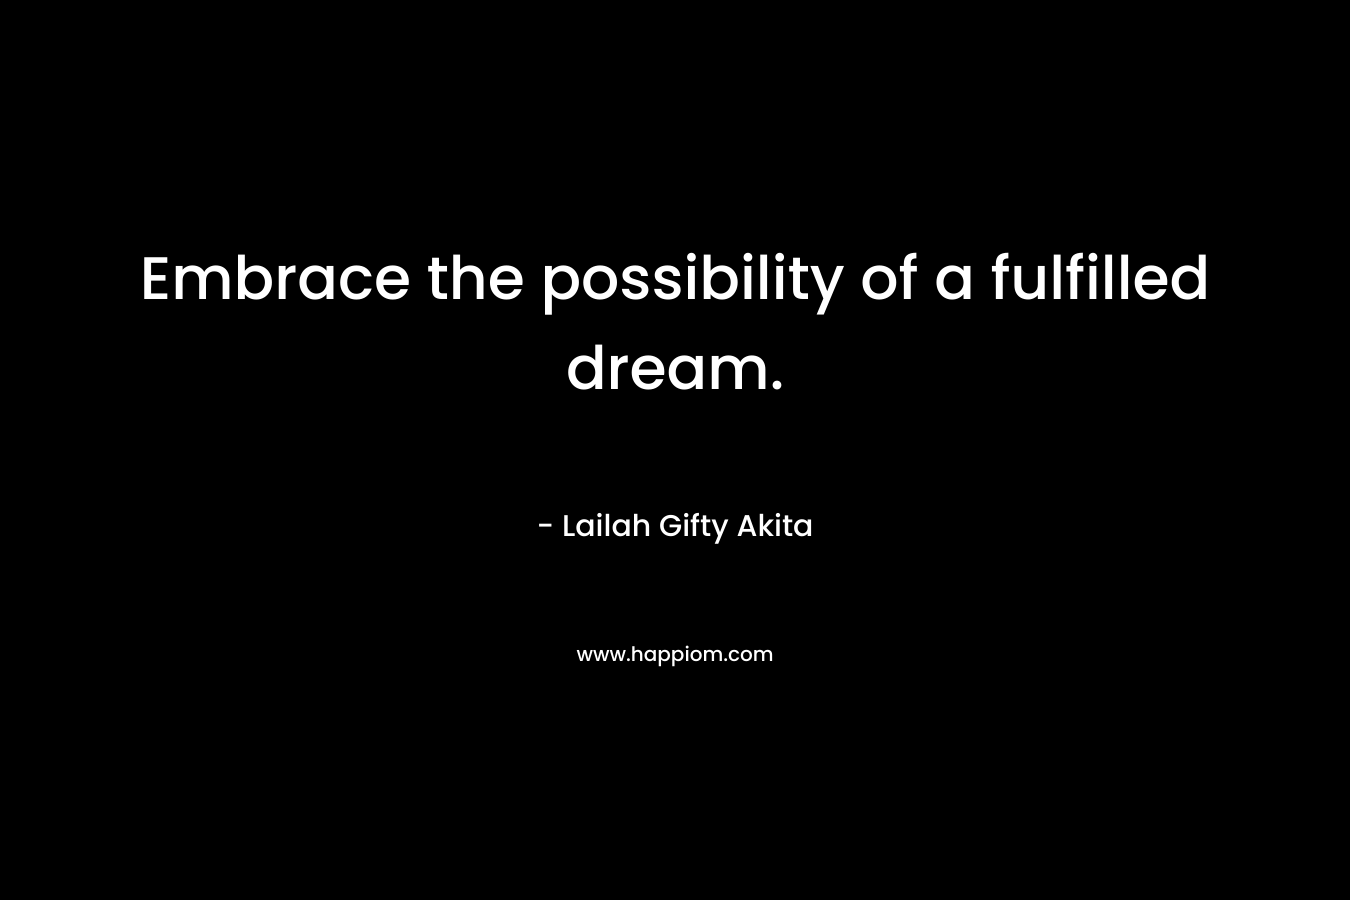 Embrace the possibility of a fulfilled dream.